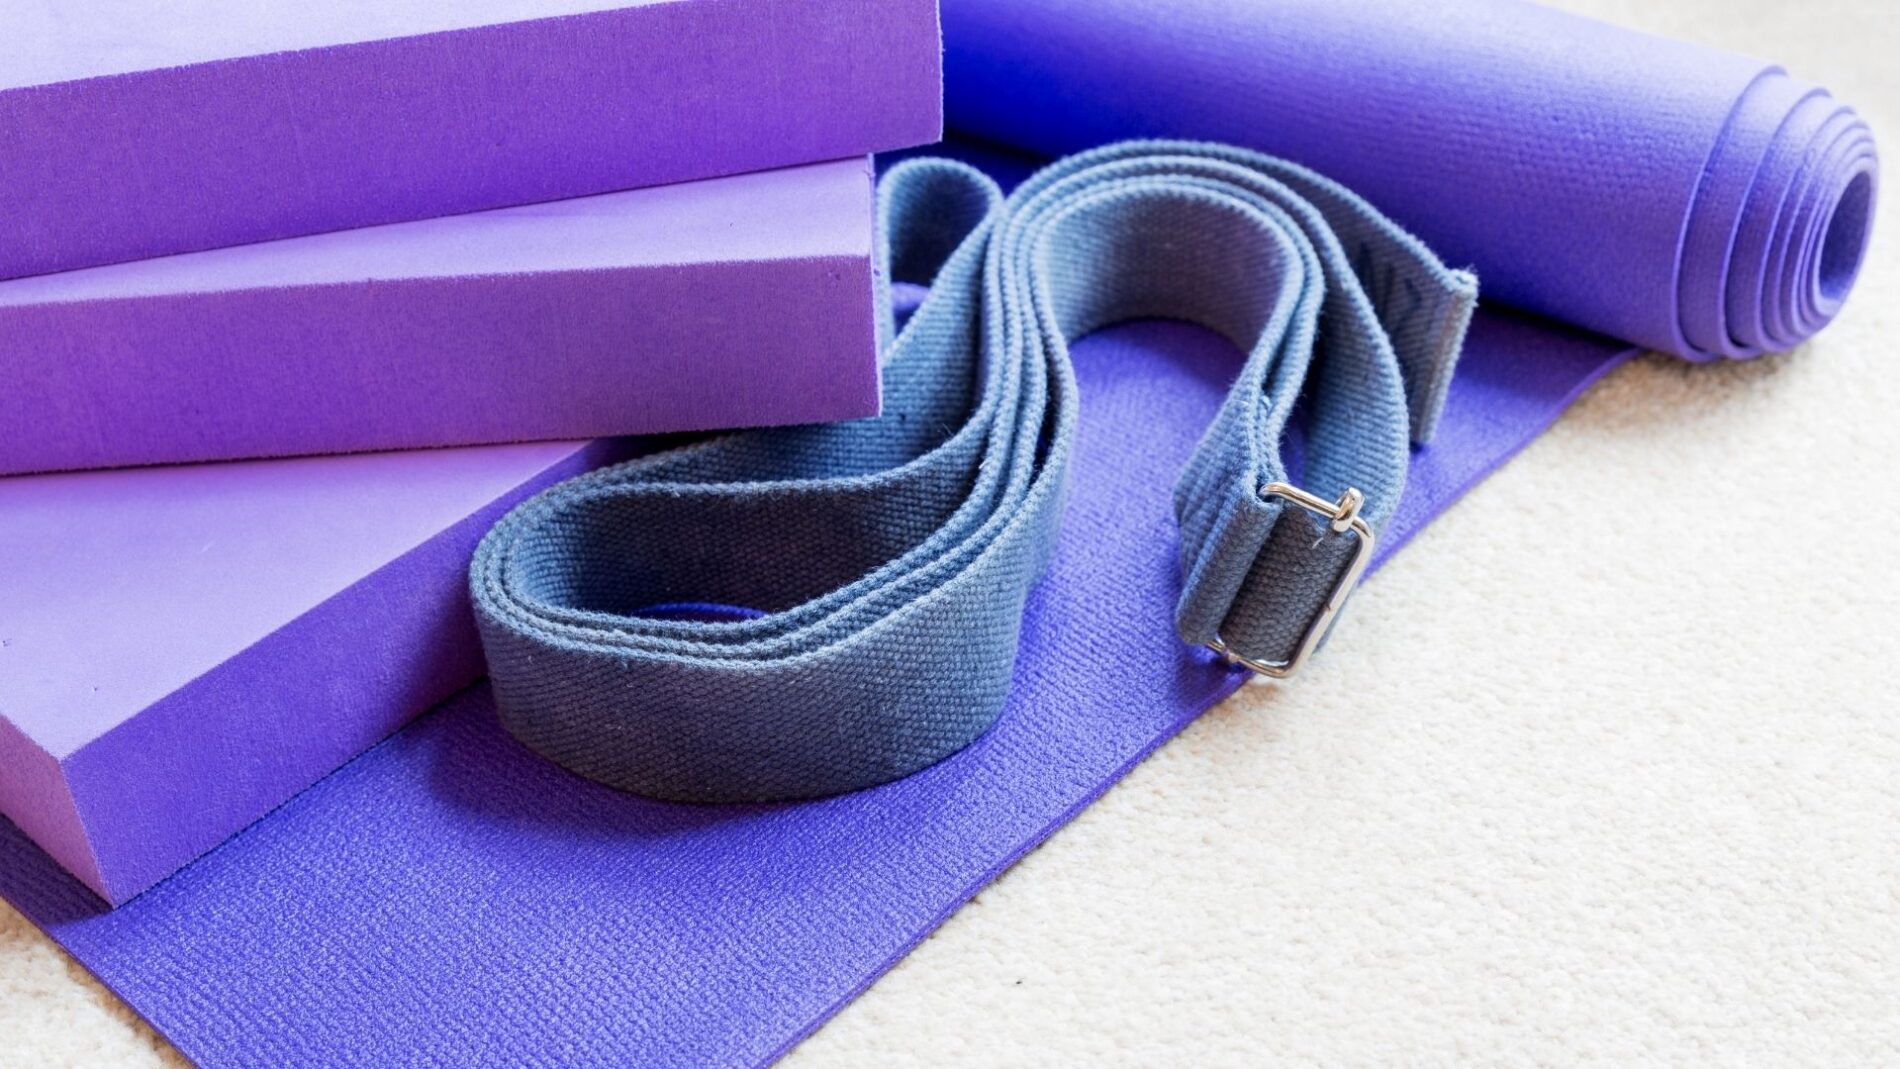 Props and Equipment of yoga